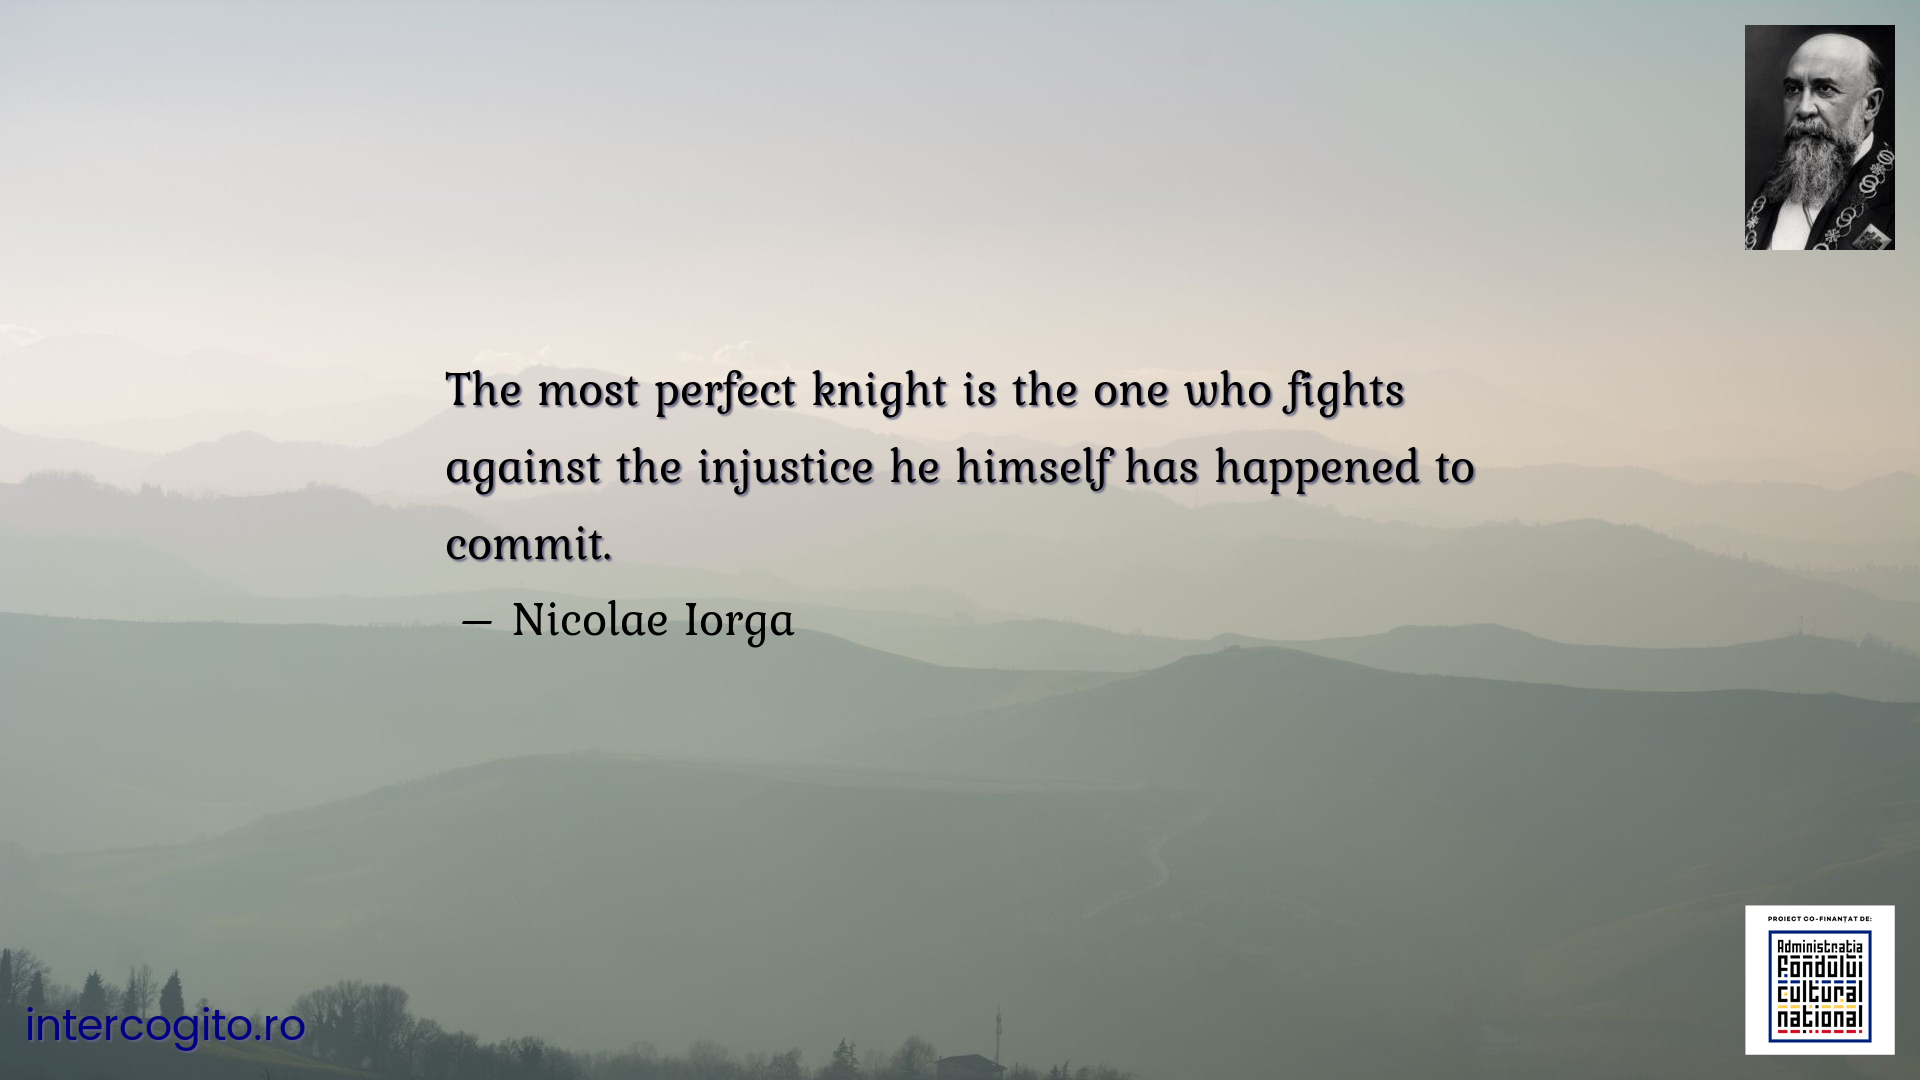 The most perfect knight is the one who fights against the injustice he himself has happened to commit.